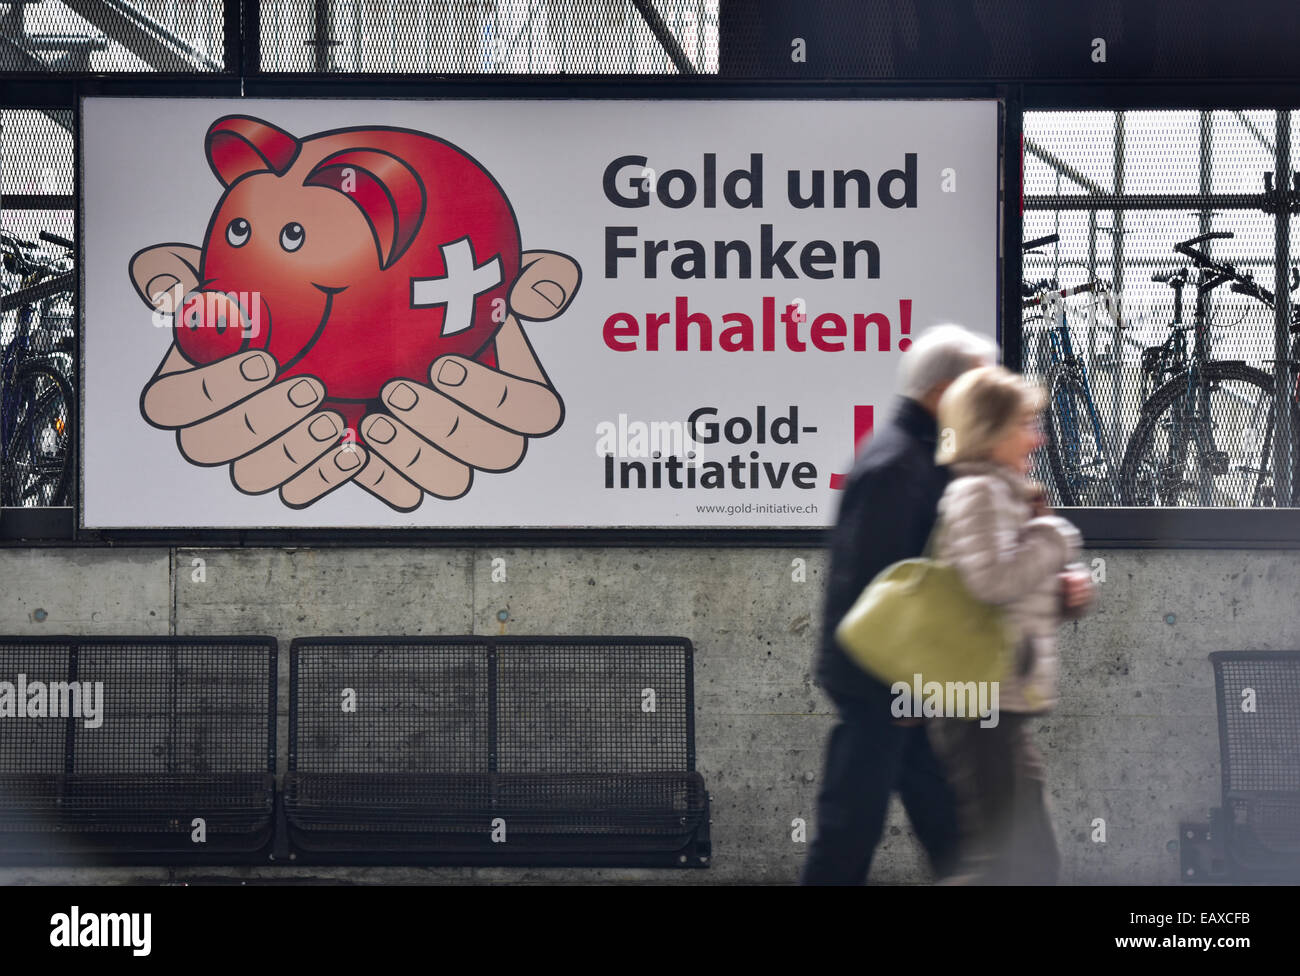 Zurich, Switzerland. 21st Nov, 2014. People at Zurich main station are passing by referendum campaign posters of the Swiss 'Gold Initiative' referendum to be held on Nov 30, 2014. With one week to go, the referendum campaign of the Swiss 'Gold Initiative' is going at full strength throughout Switzerland. The controversial referendum is aiming to force the Swiss National Bank to hold at least 20% of all assets in physical gold. Credit:  Erik Tham/Alamy Live News Stock Photo